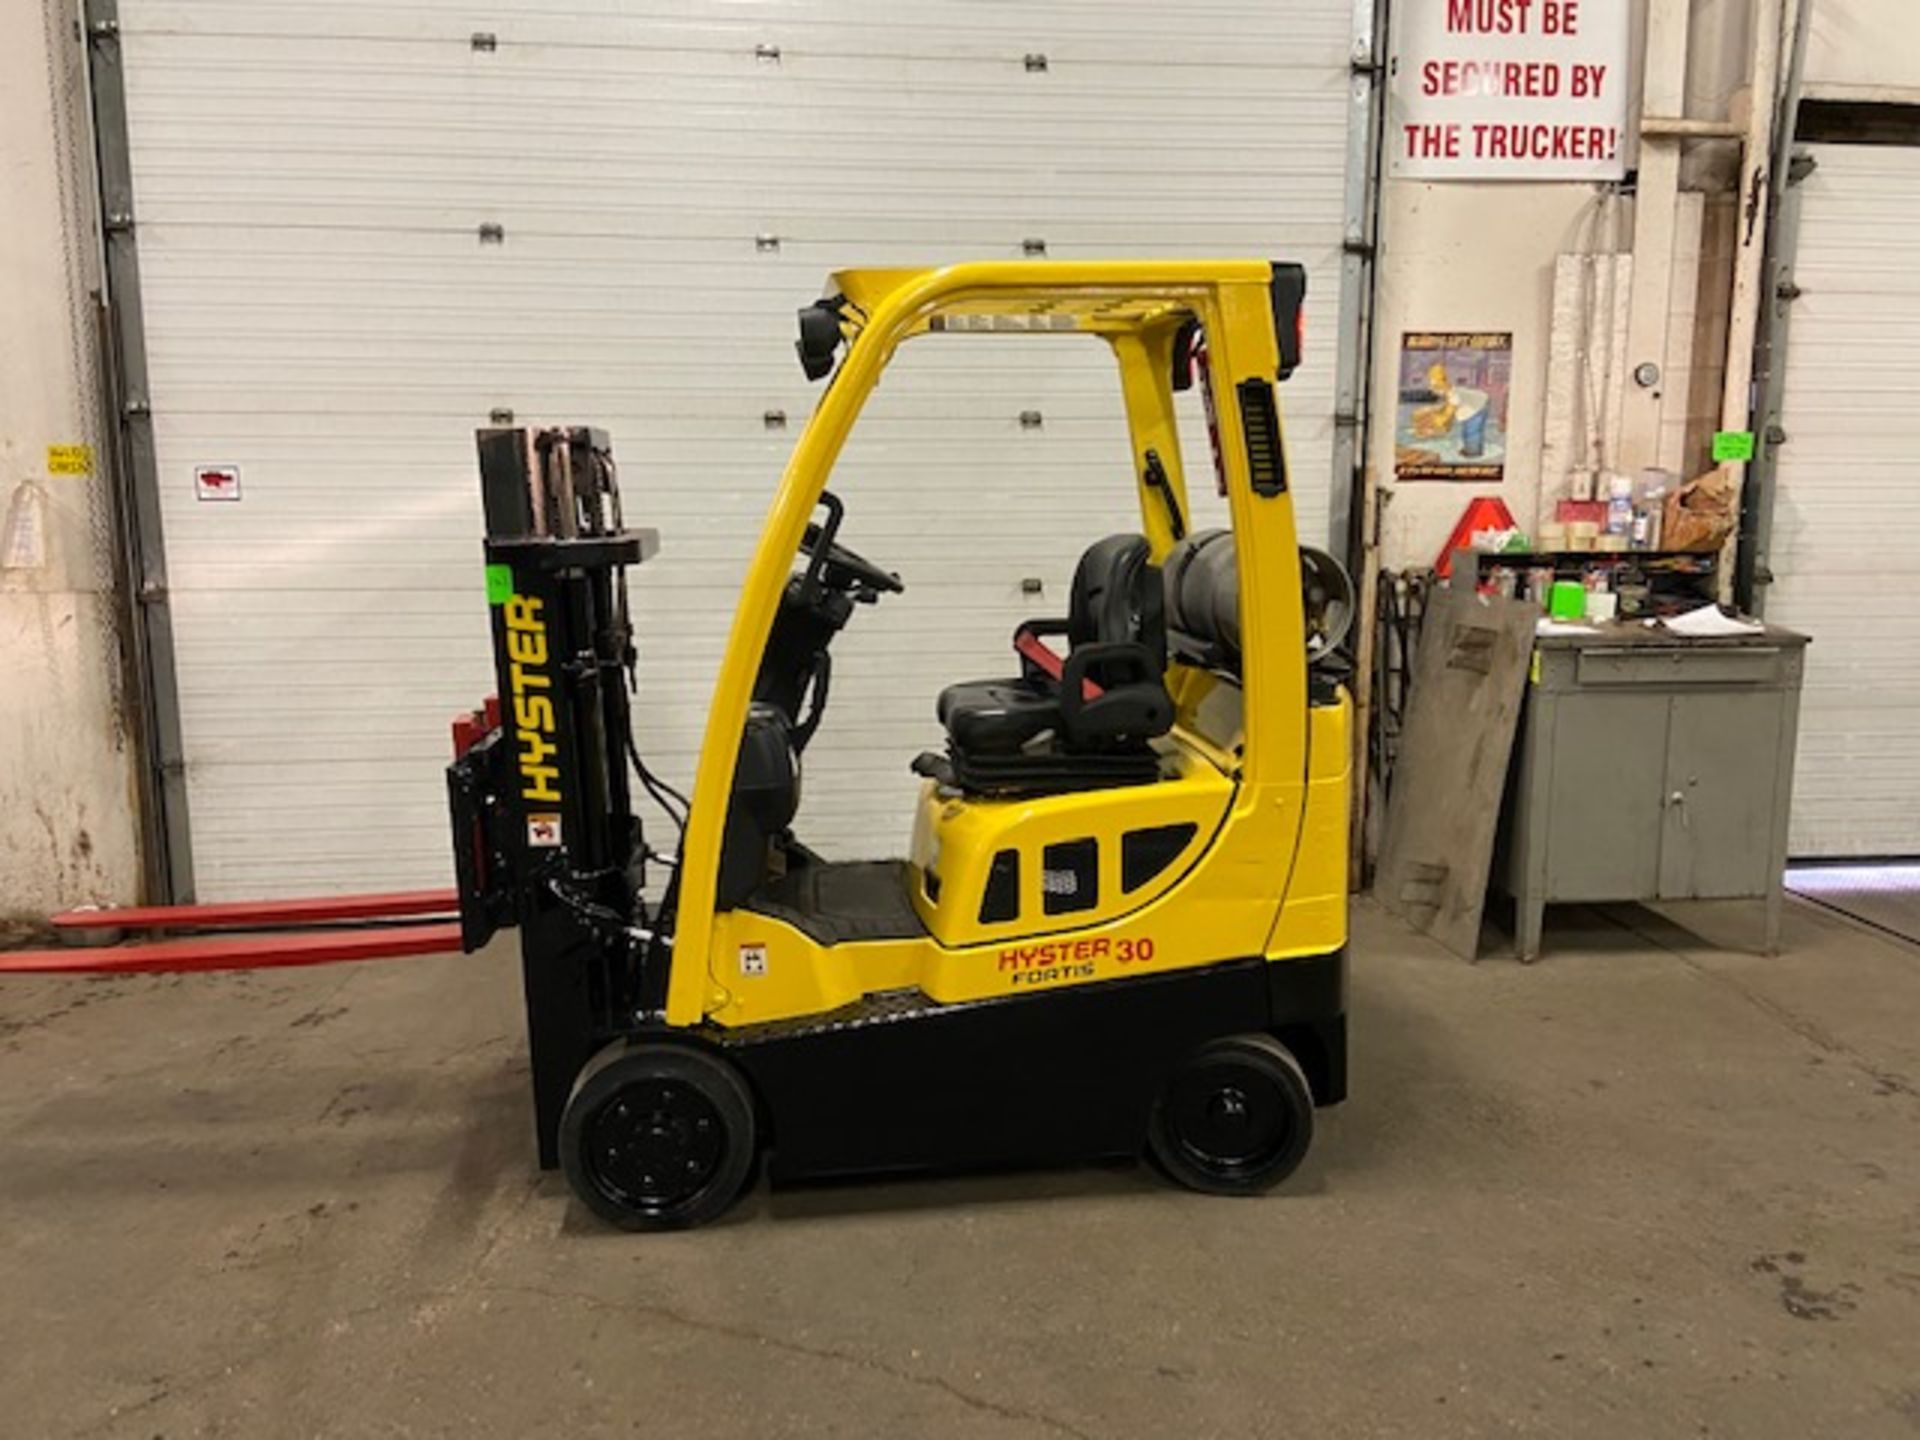 FREE CUSTOMS - 2015 Hyster 3000lbs Capacity Forklift LPG (propane) with sideshift (no propane tank